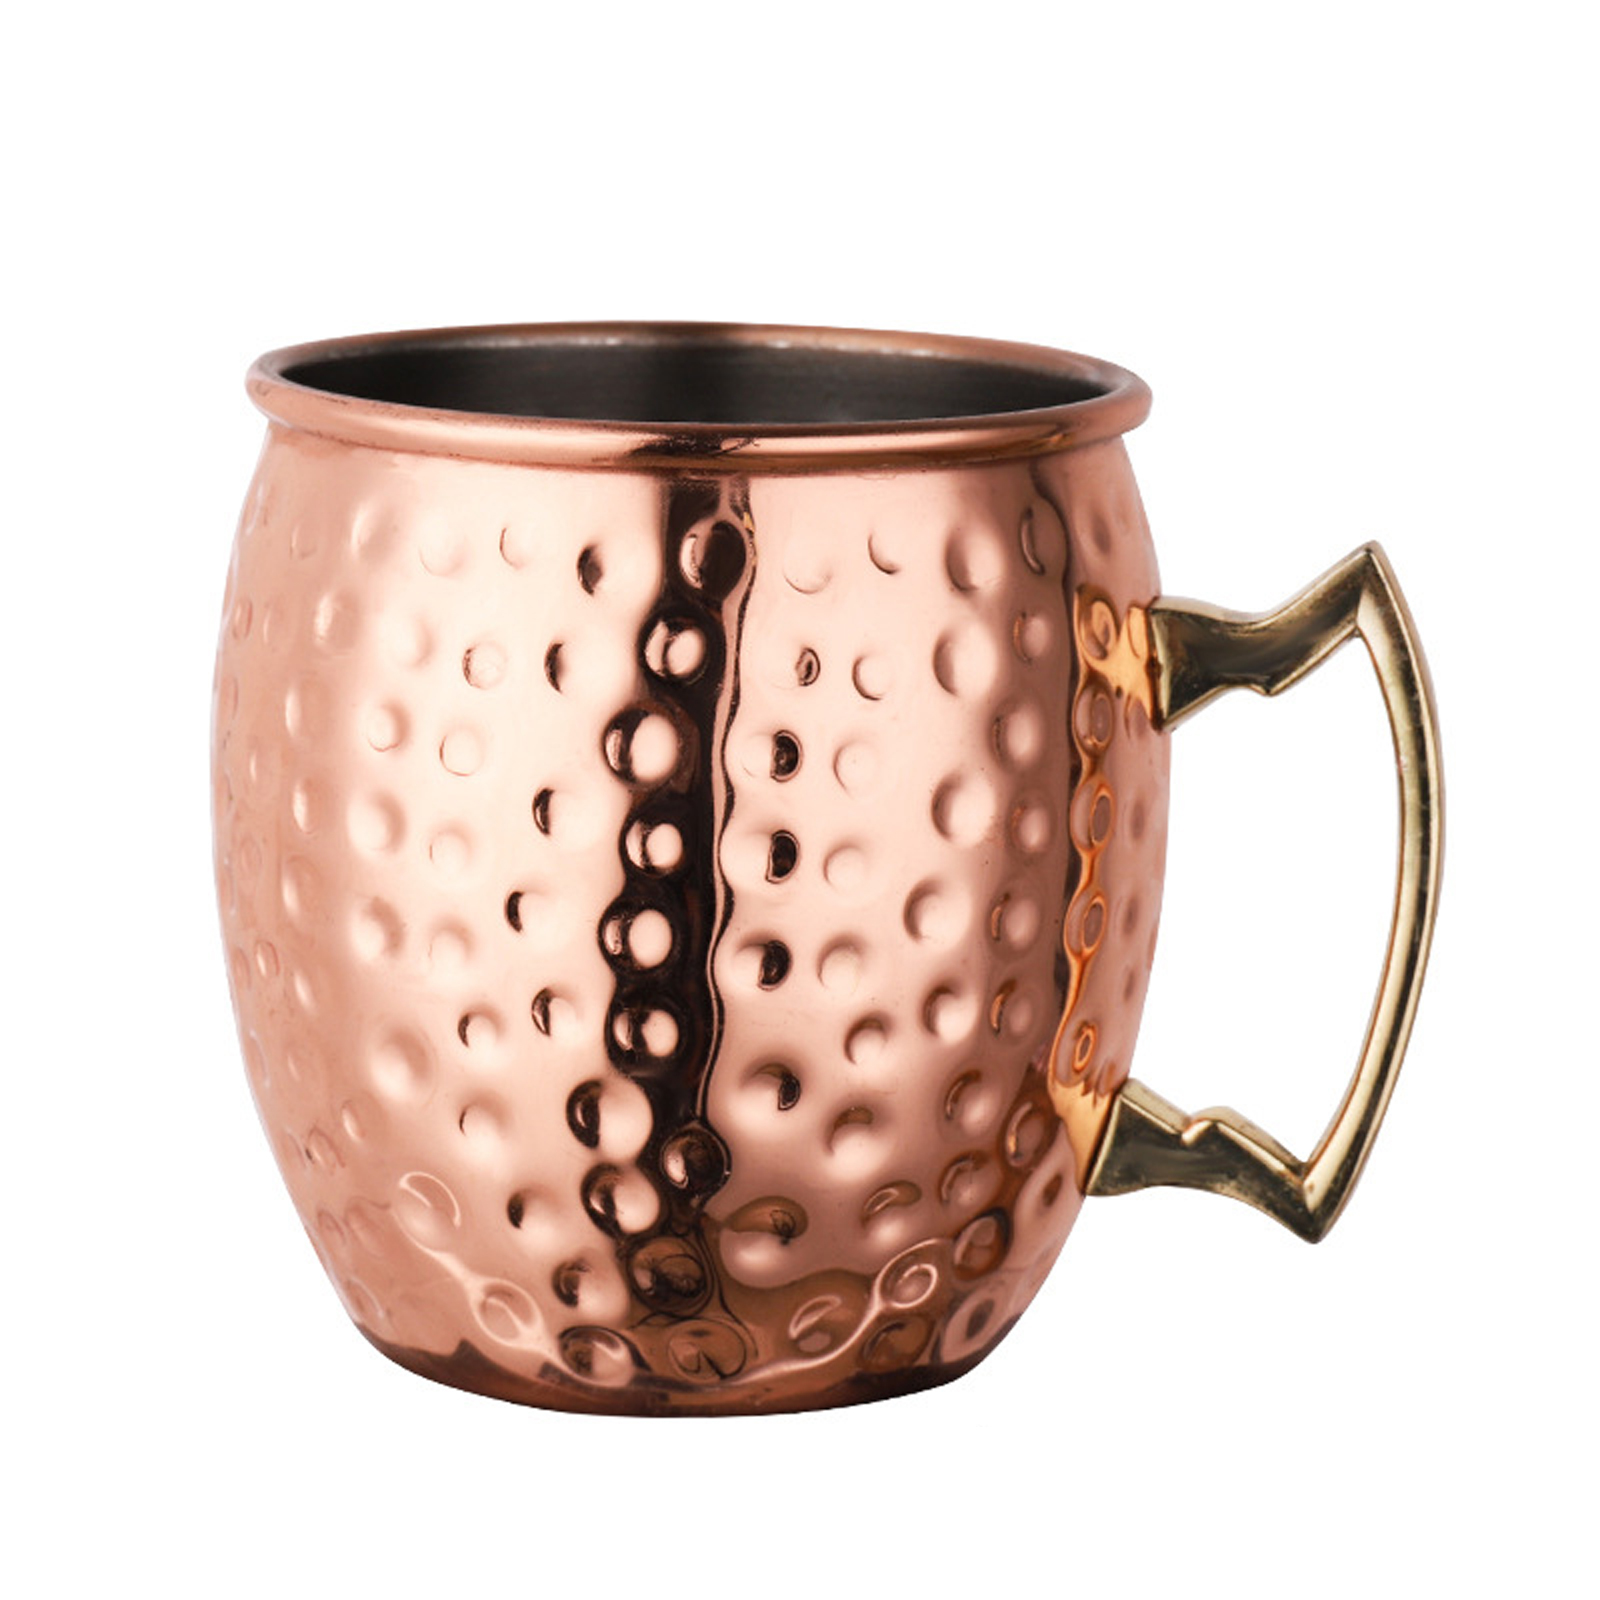 Moscow Mule Copper Mugs Hand-made 304 Stainless Steel Copper Mugs For Cocktails Whiskey Champagne Wine